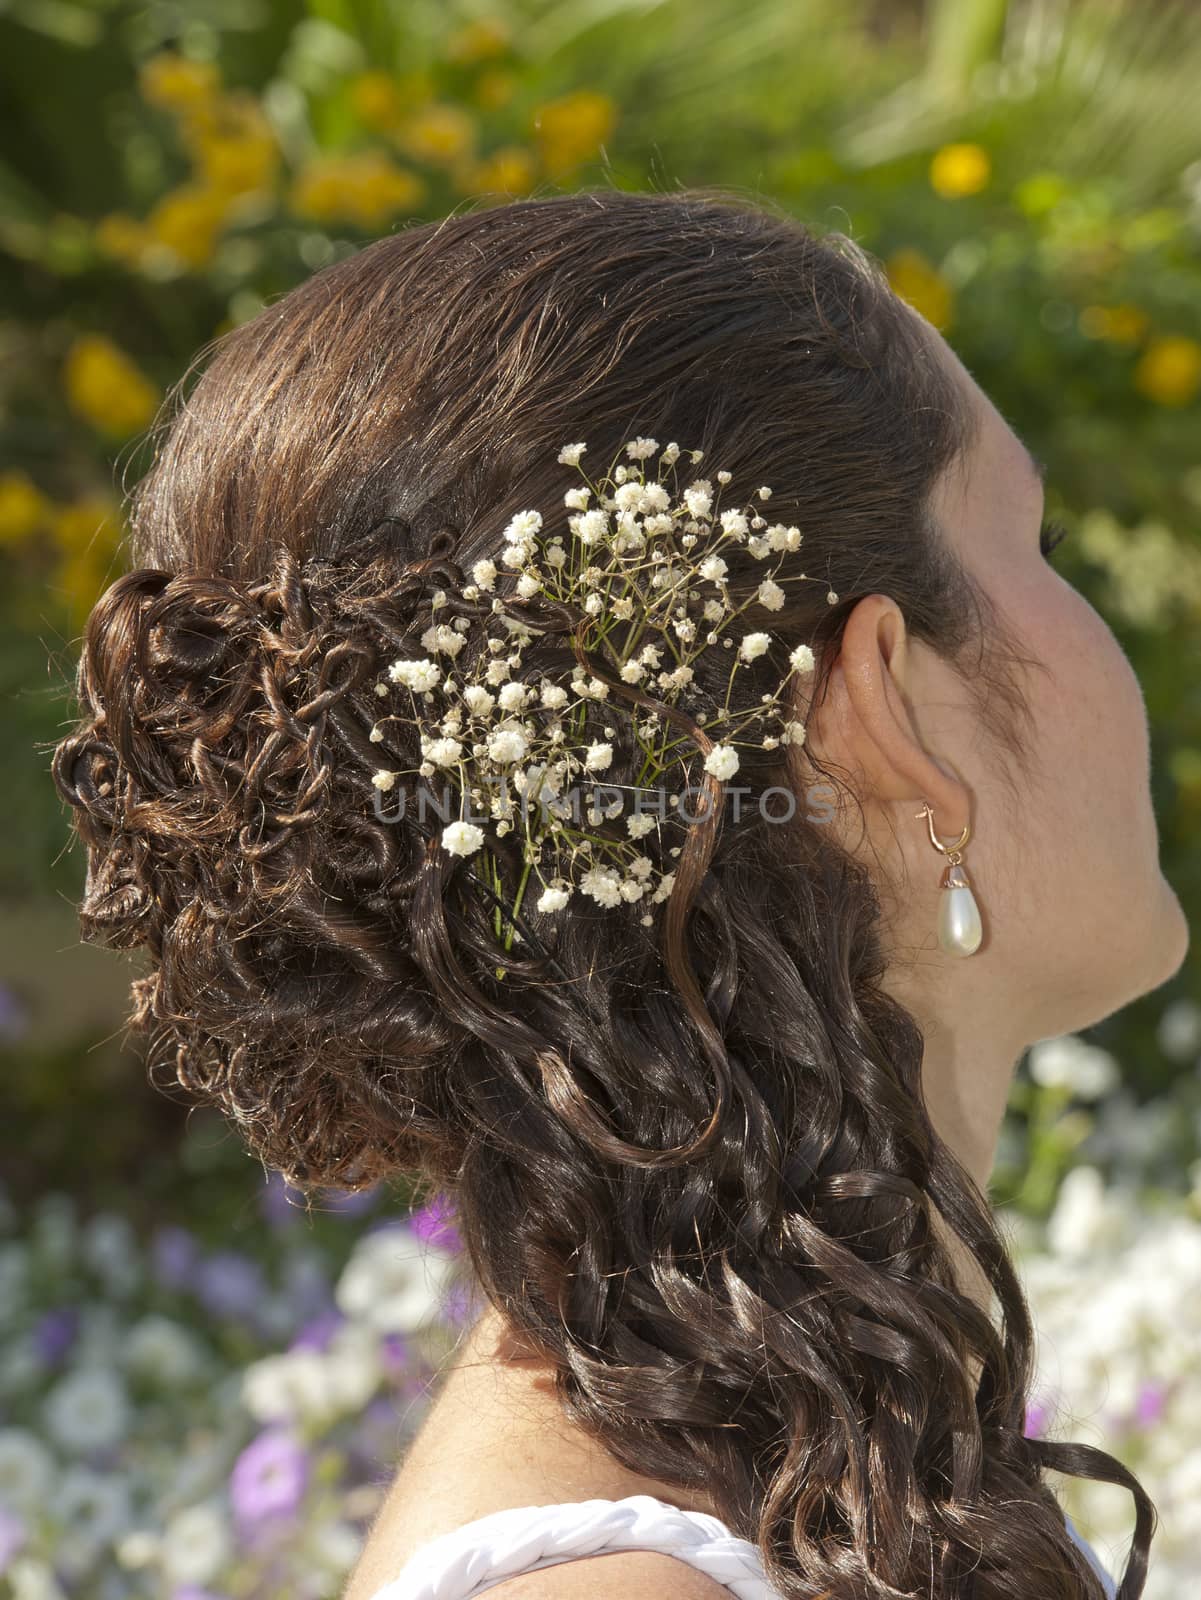 Ornate hair style with decoration on the head of a bride